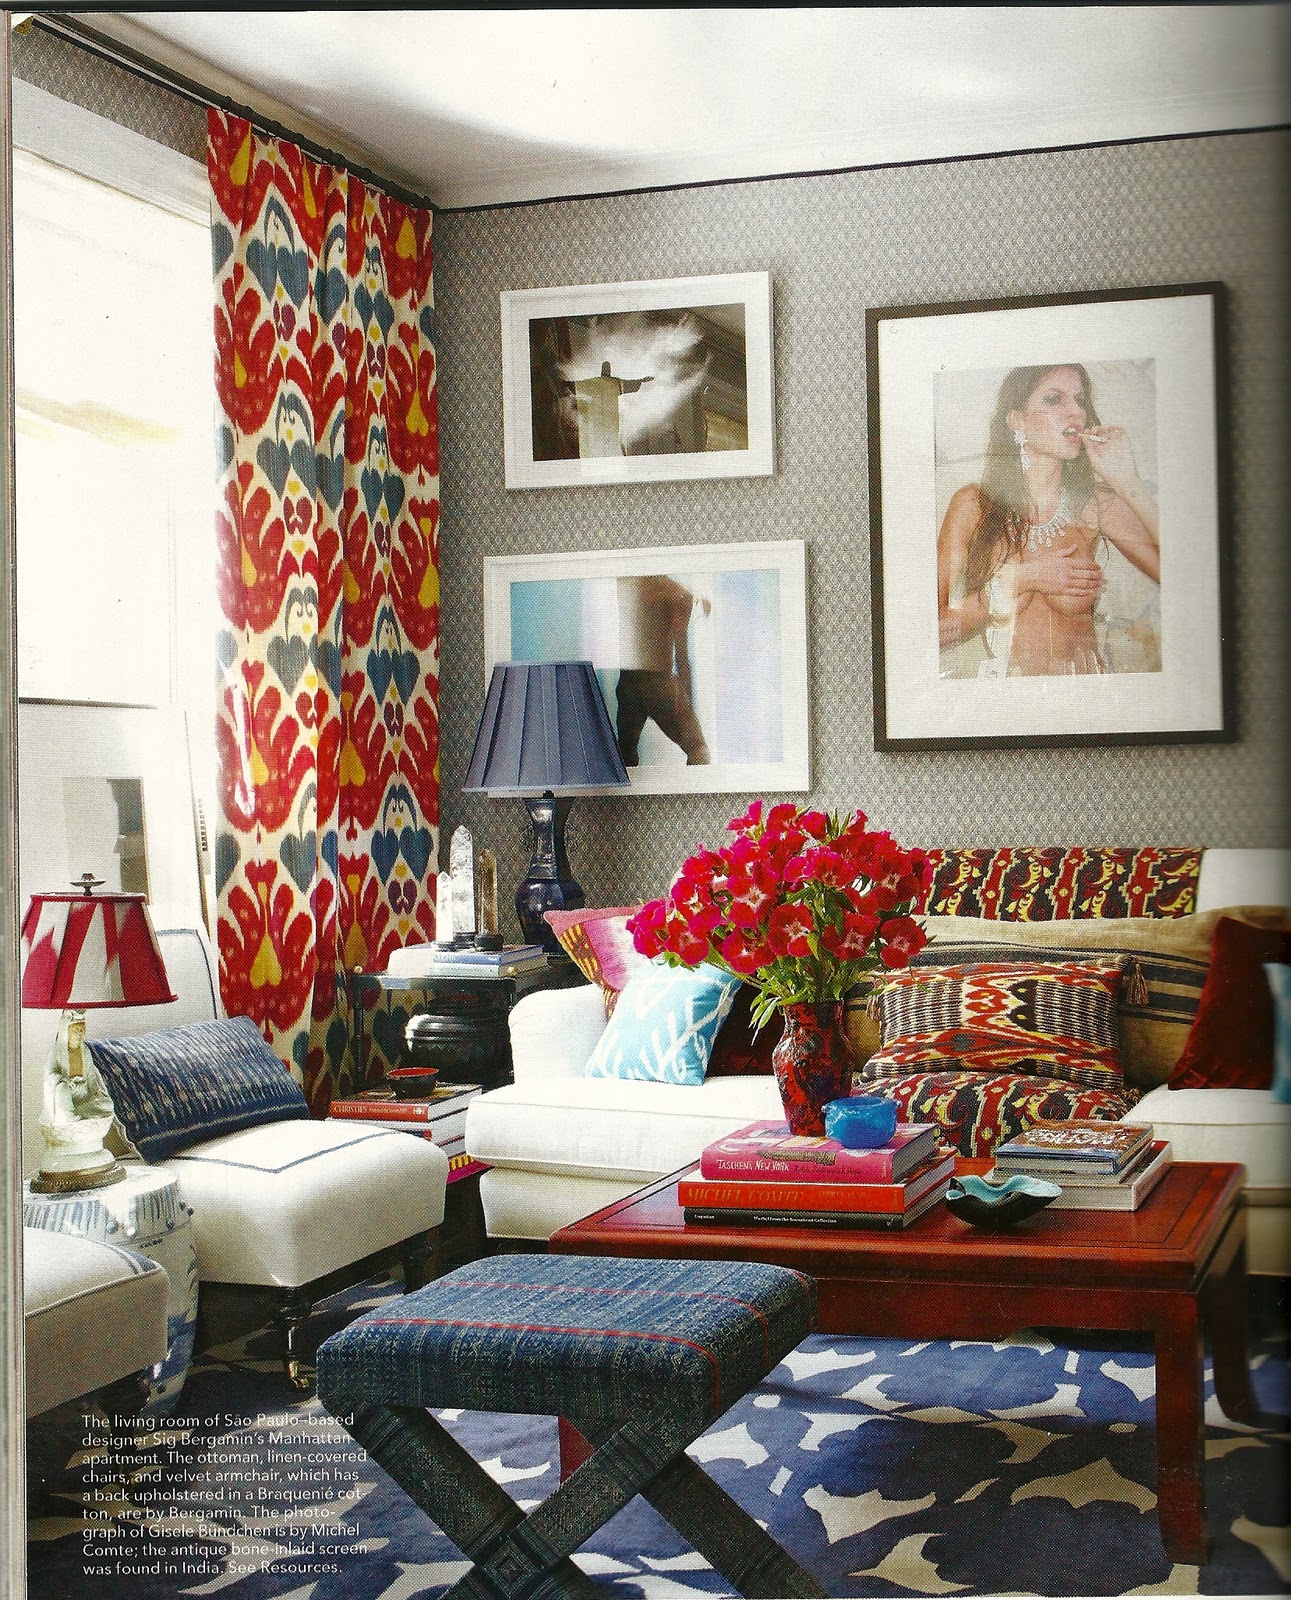 ... eclectic mix of patterns and fabrics and wallpaper wallpaper wallpaper